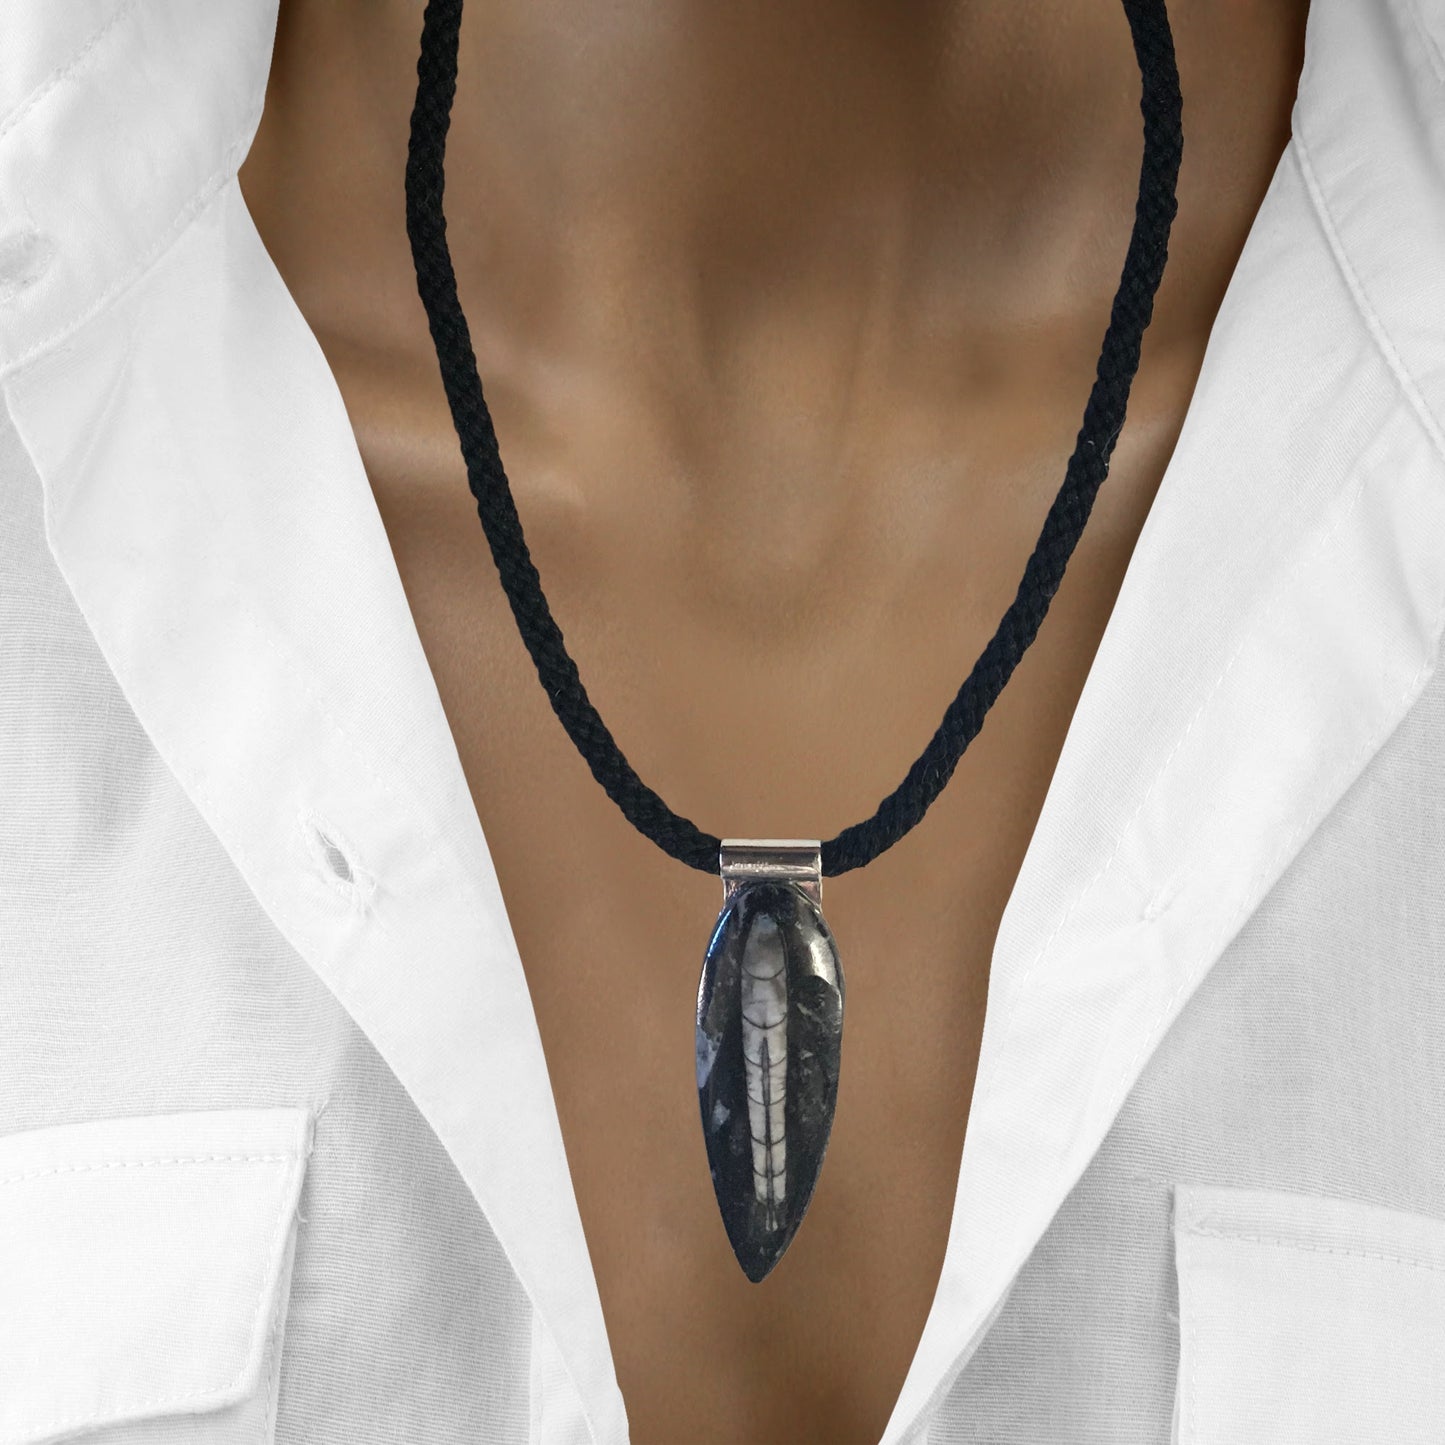 Mock up of a woman wearing the necklace